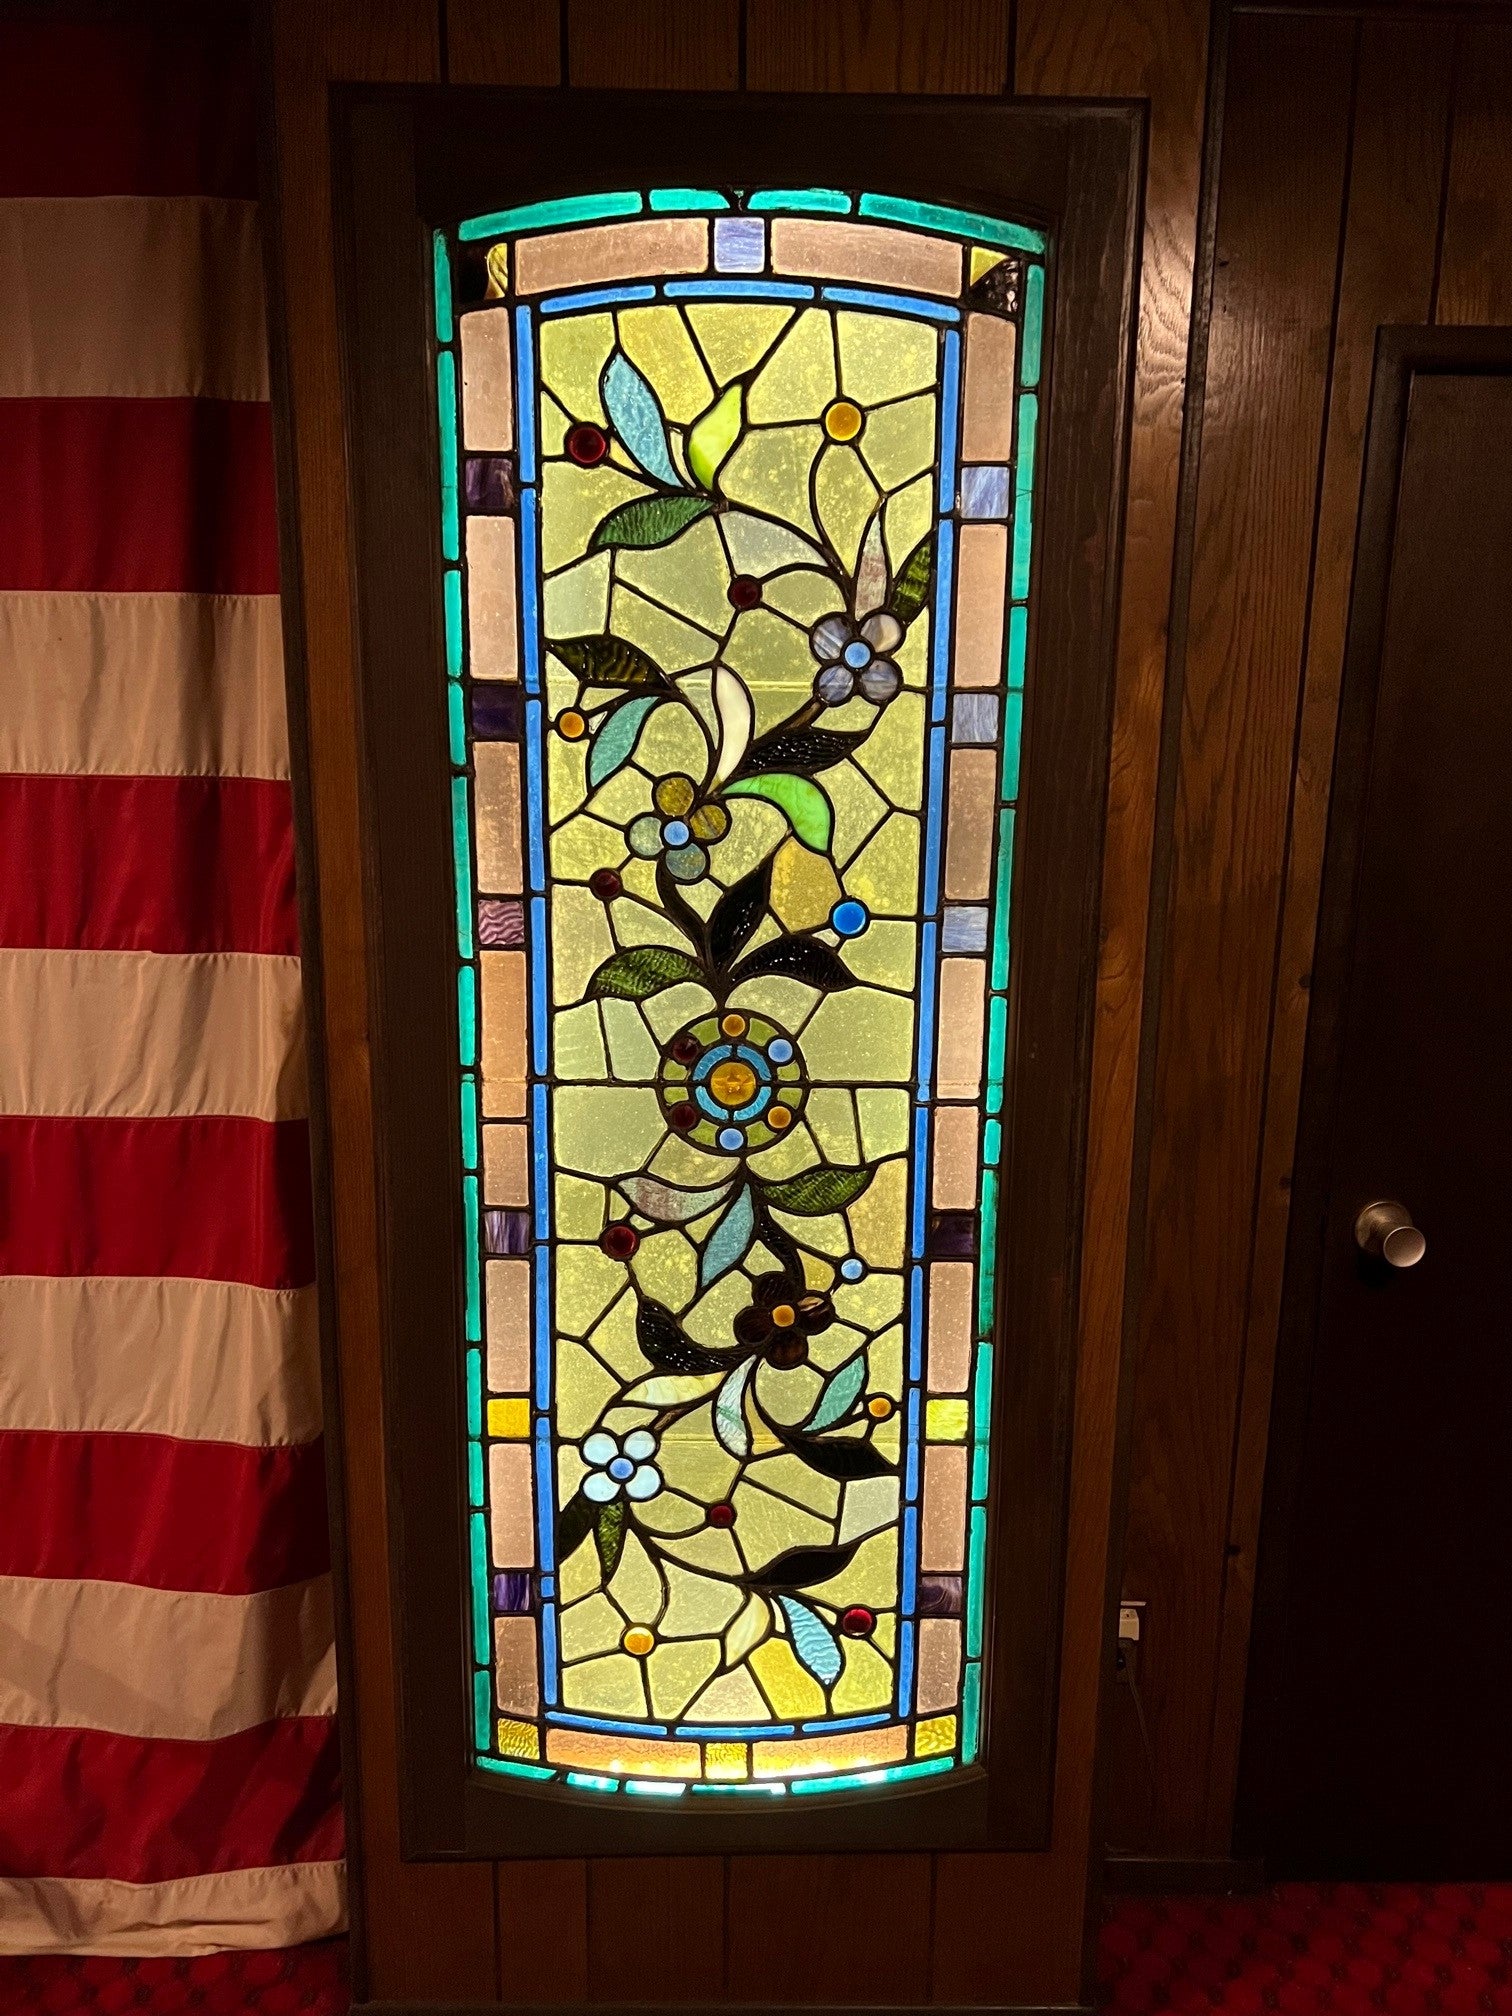 Beautiful late 19th century antique stained glass window with flowers and jewels. This is a great window with good colors from a private billiards room in Fairfield County Ct. Original salvaged from an estate in northern New Jersey over 40 years